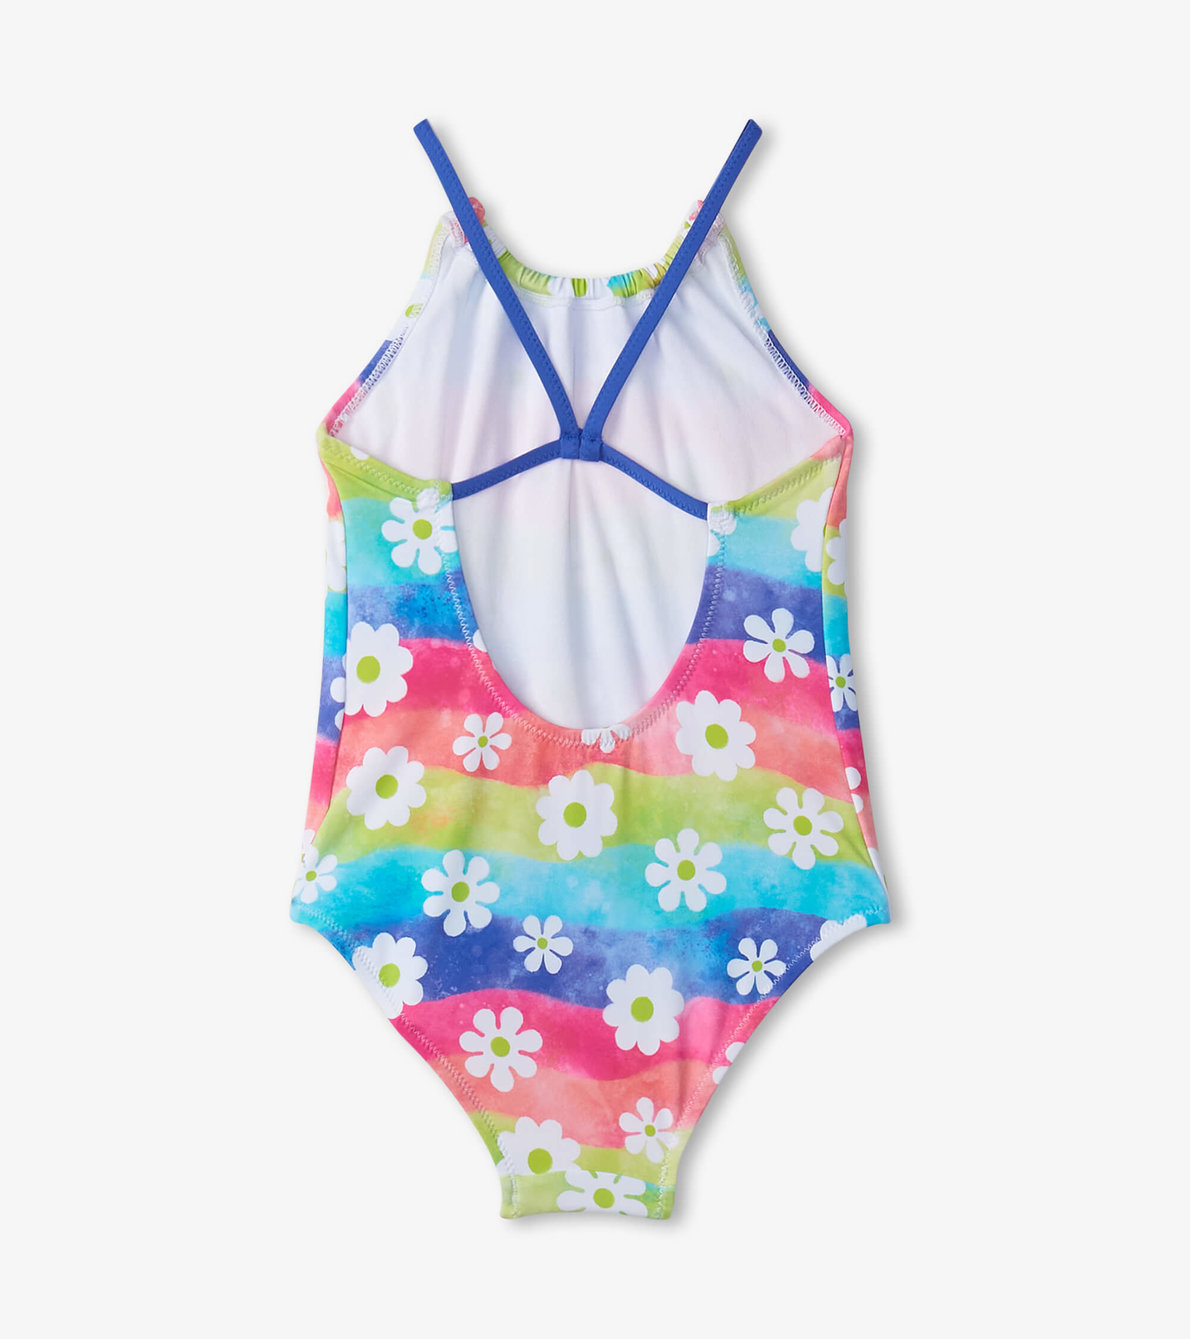 View larger image of Girls Rainbow Flower Gathered Swimsuit